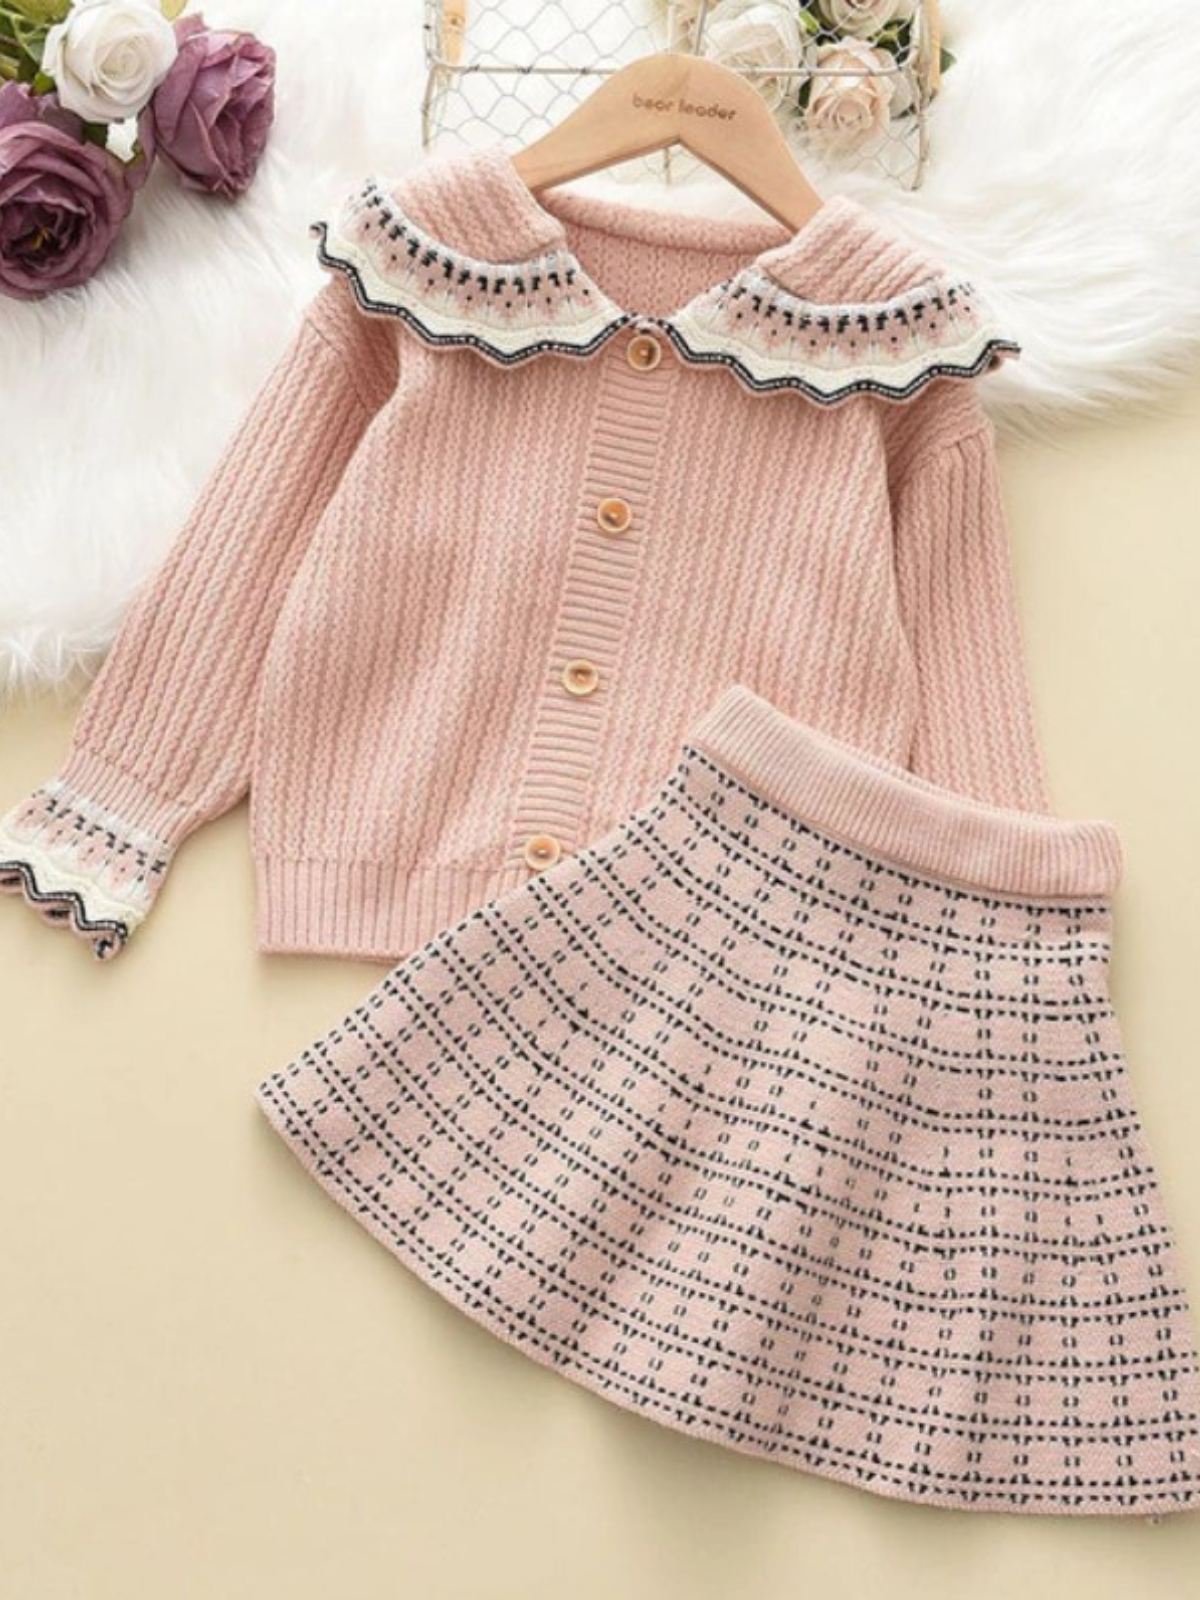 She's A Sweetheart Pink Knit Sweater and Skirt Set